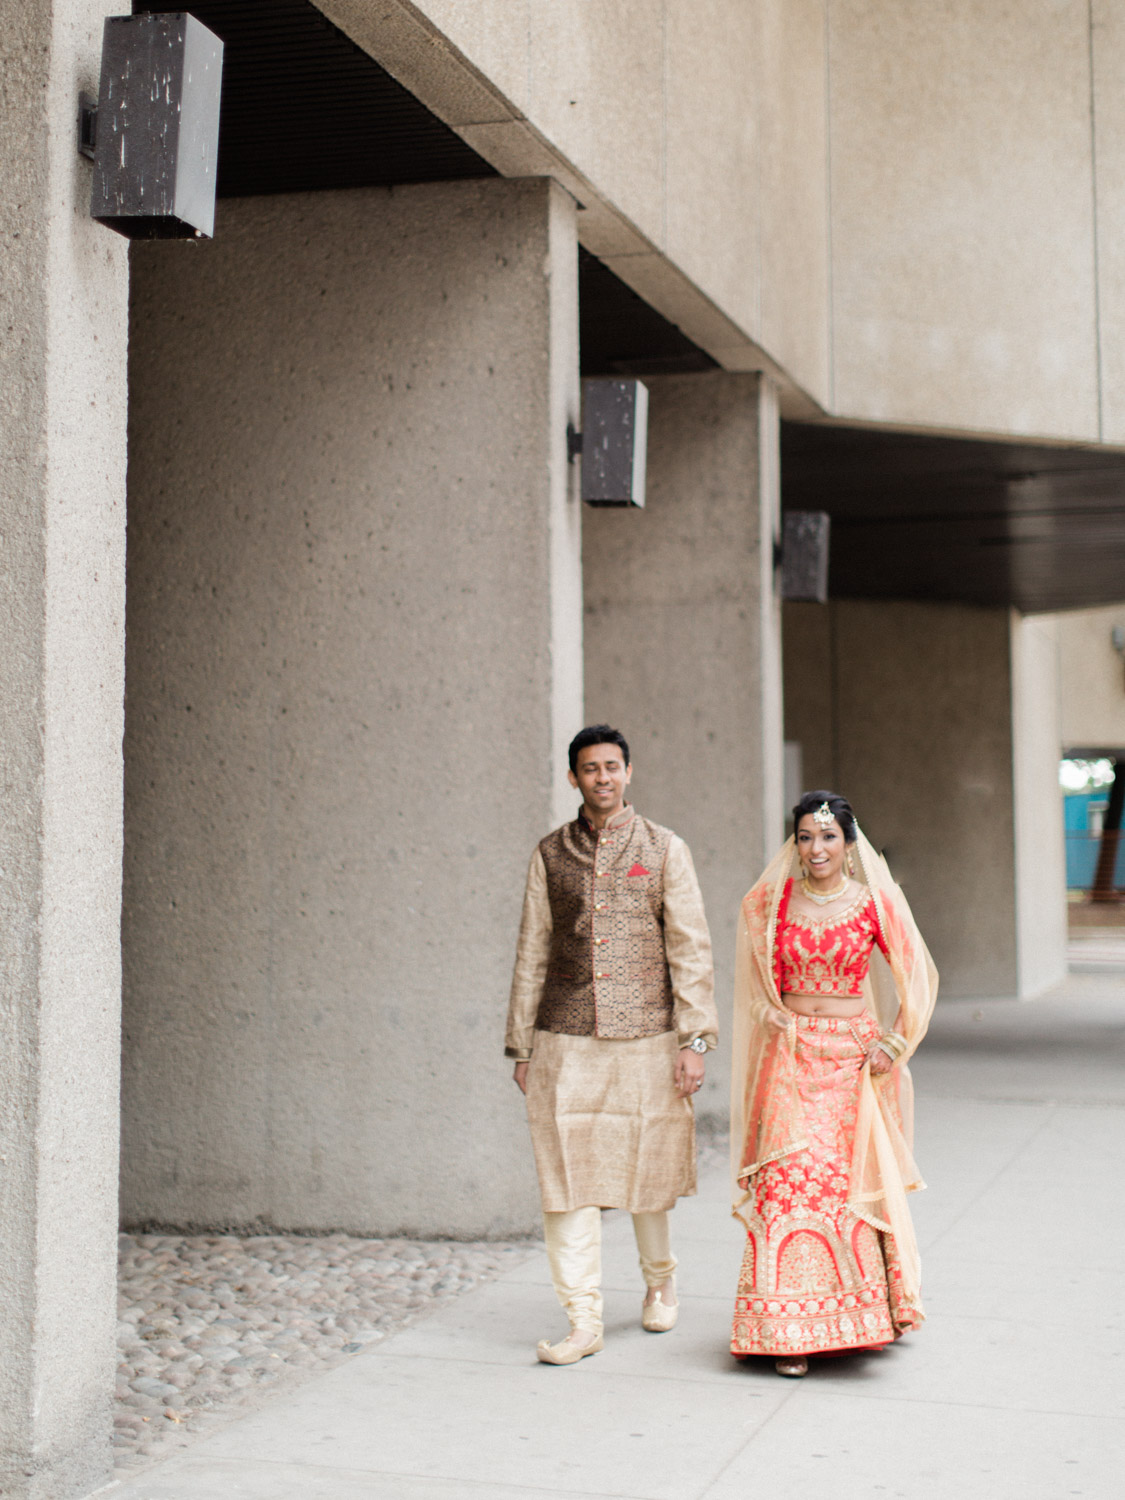 Wedding photographs from Tanvi &amp; Chintan's intimate indian wedding at the Westin Harbour Castle, by toronto wedding photographer corynn fowler photography